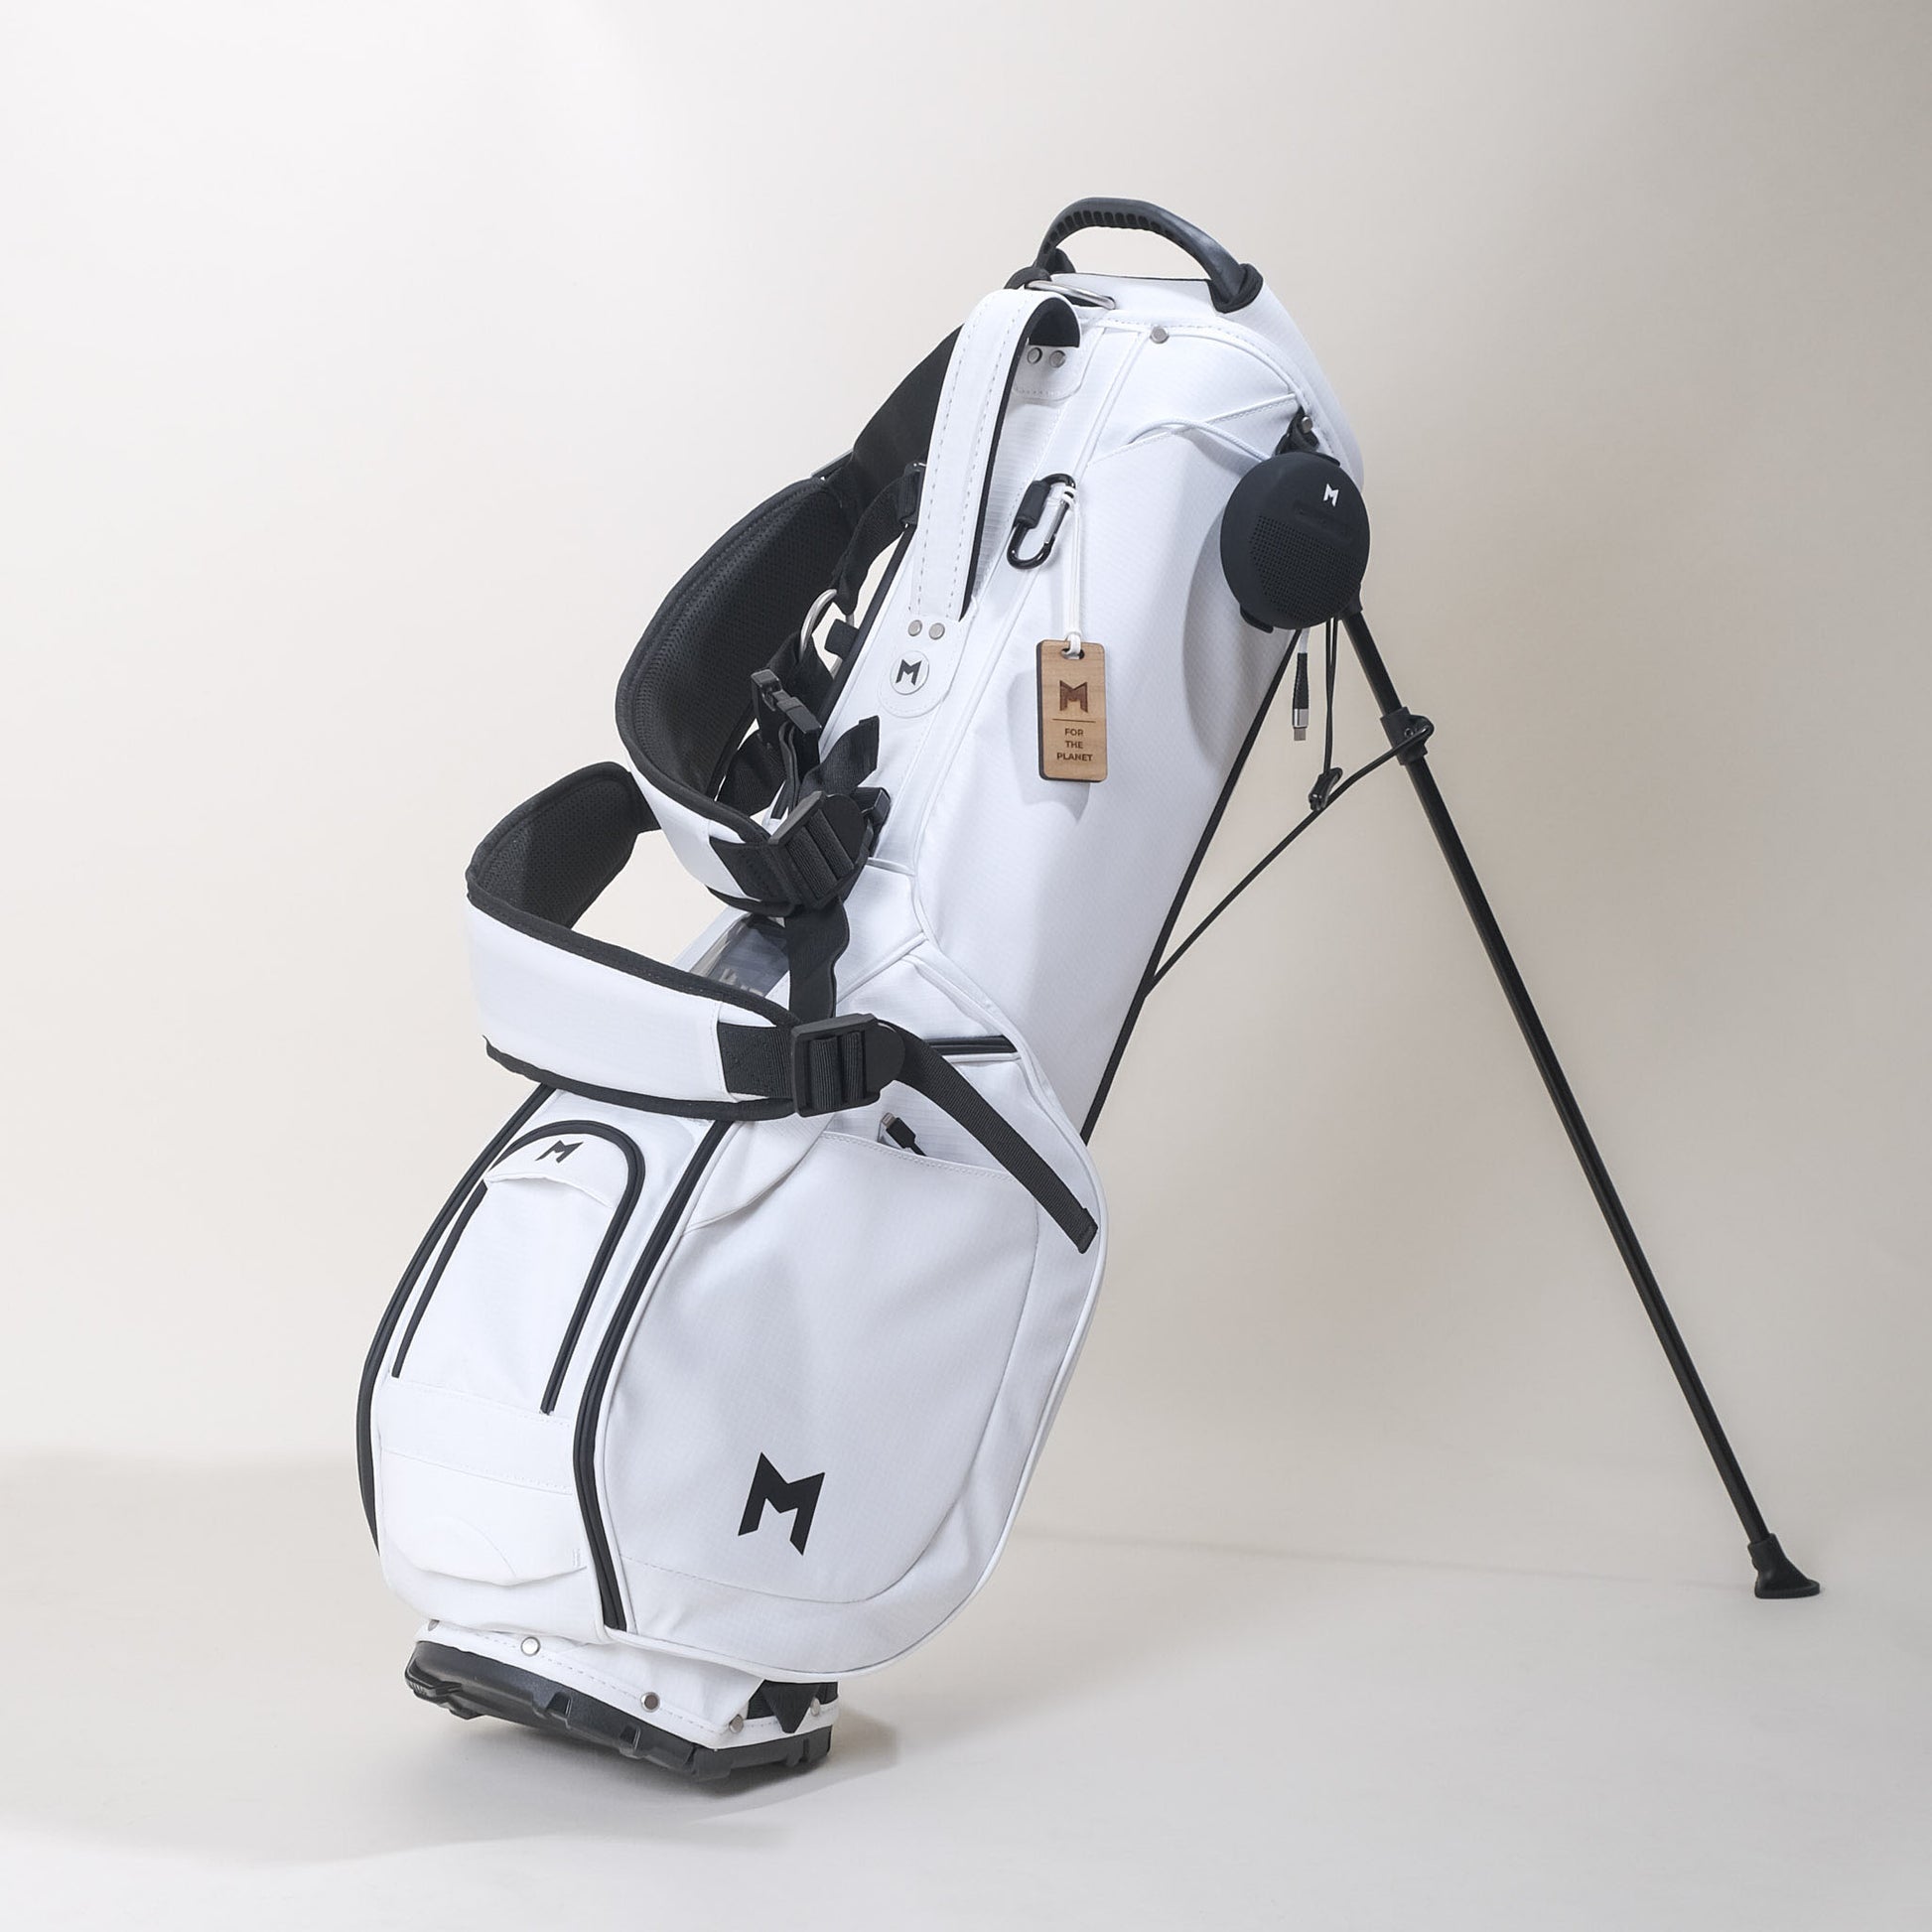 This is MNML GOLF's white MR1 eco friendly golf bag made from recycled water bottles. 